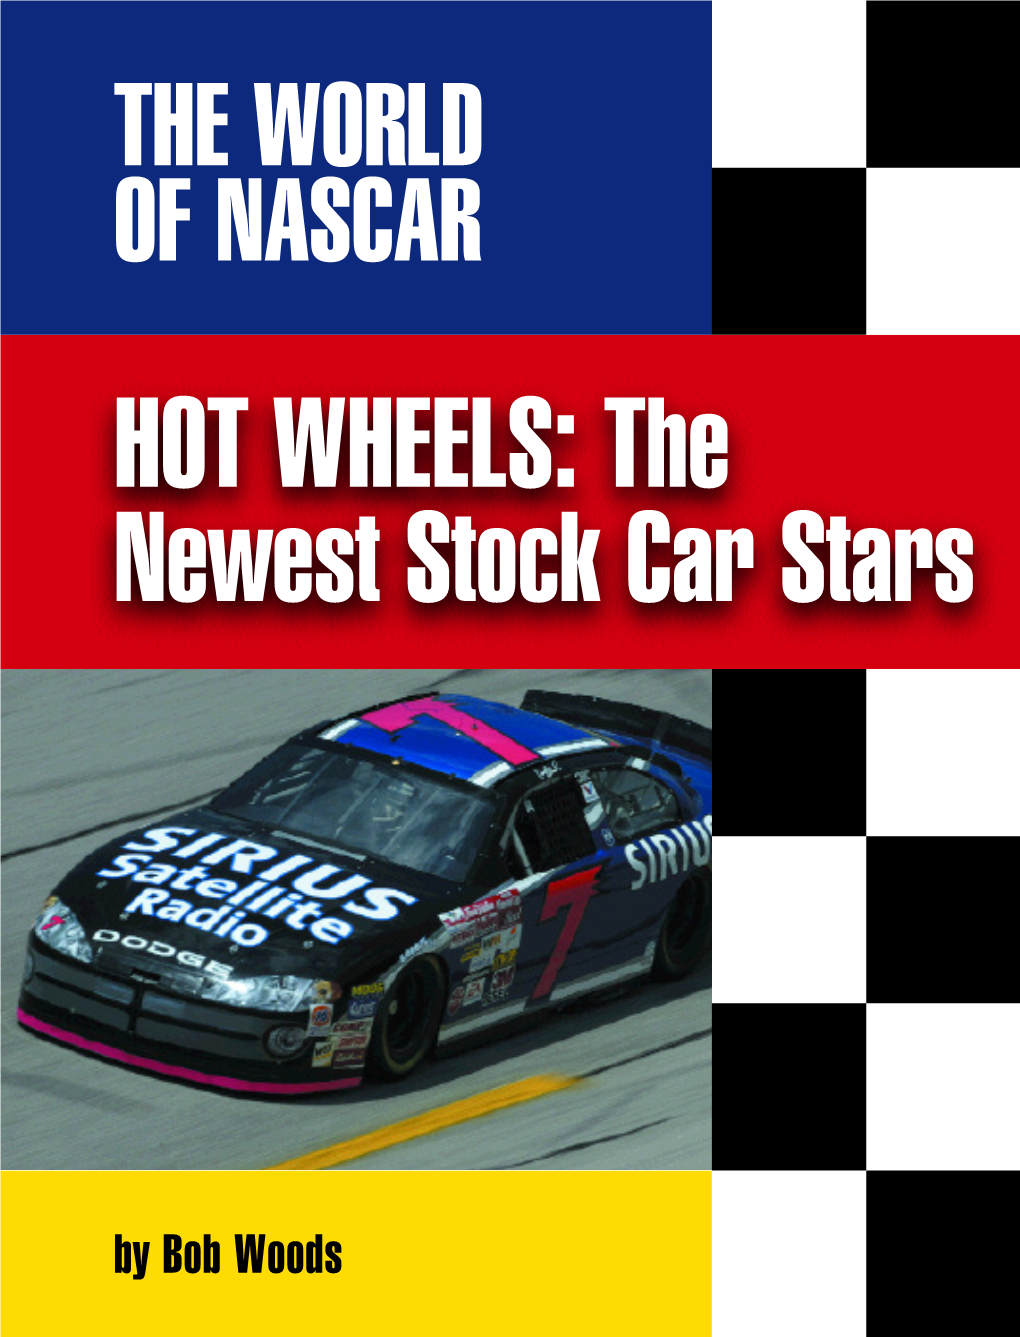 HOT WHEELS: the NEWEST STOCK CAR STARS the Answer Is Stock Car Racing, One of America’S Most Popular and Fastest-Growing Sports